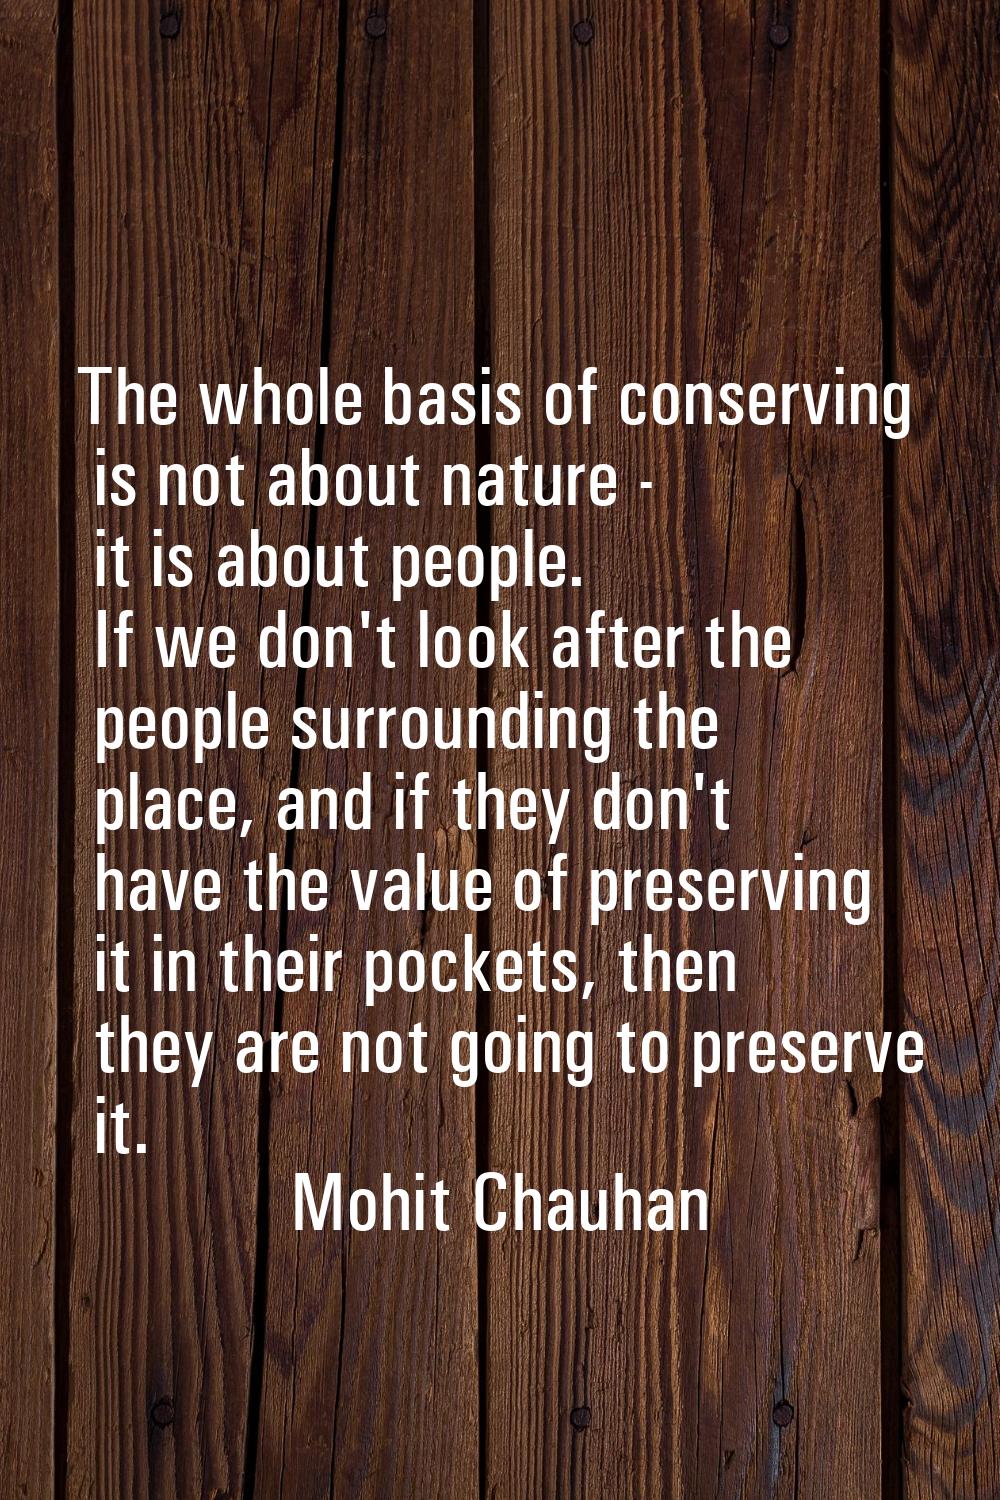 The whole basis of conserving is not about nature - it is about people. If we don't look after the 